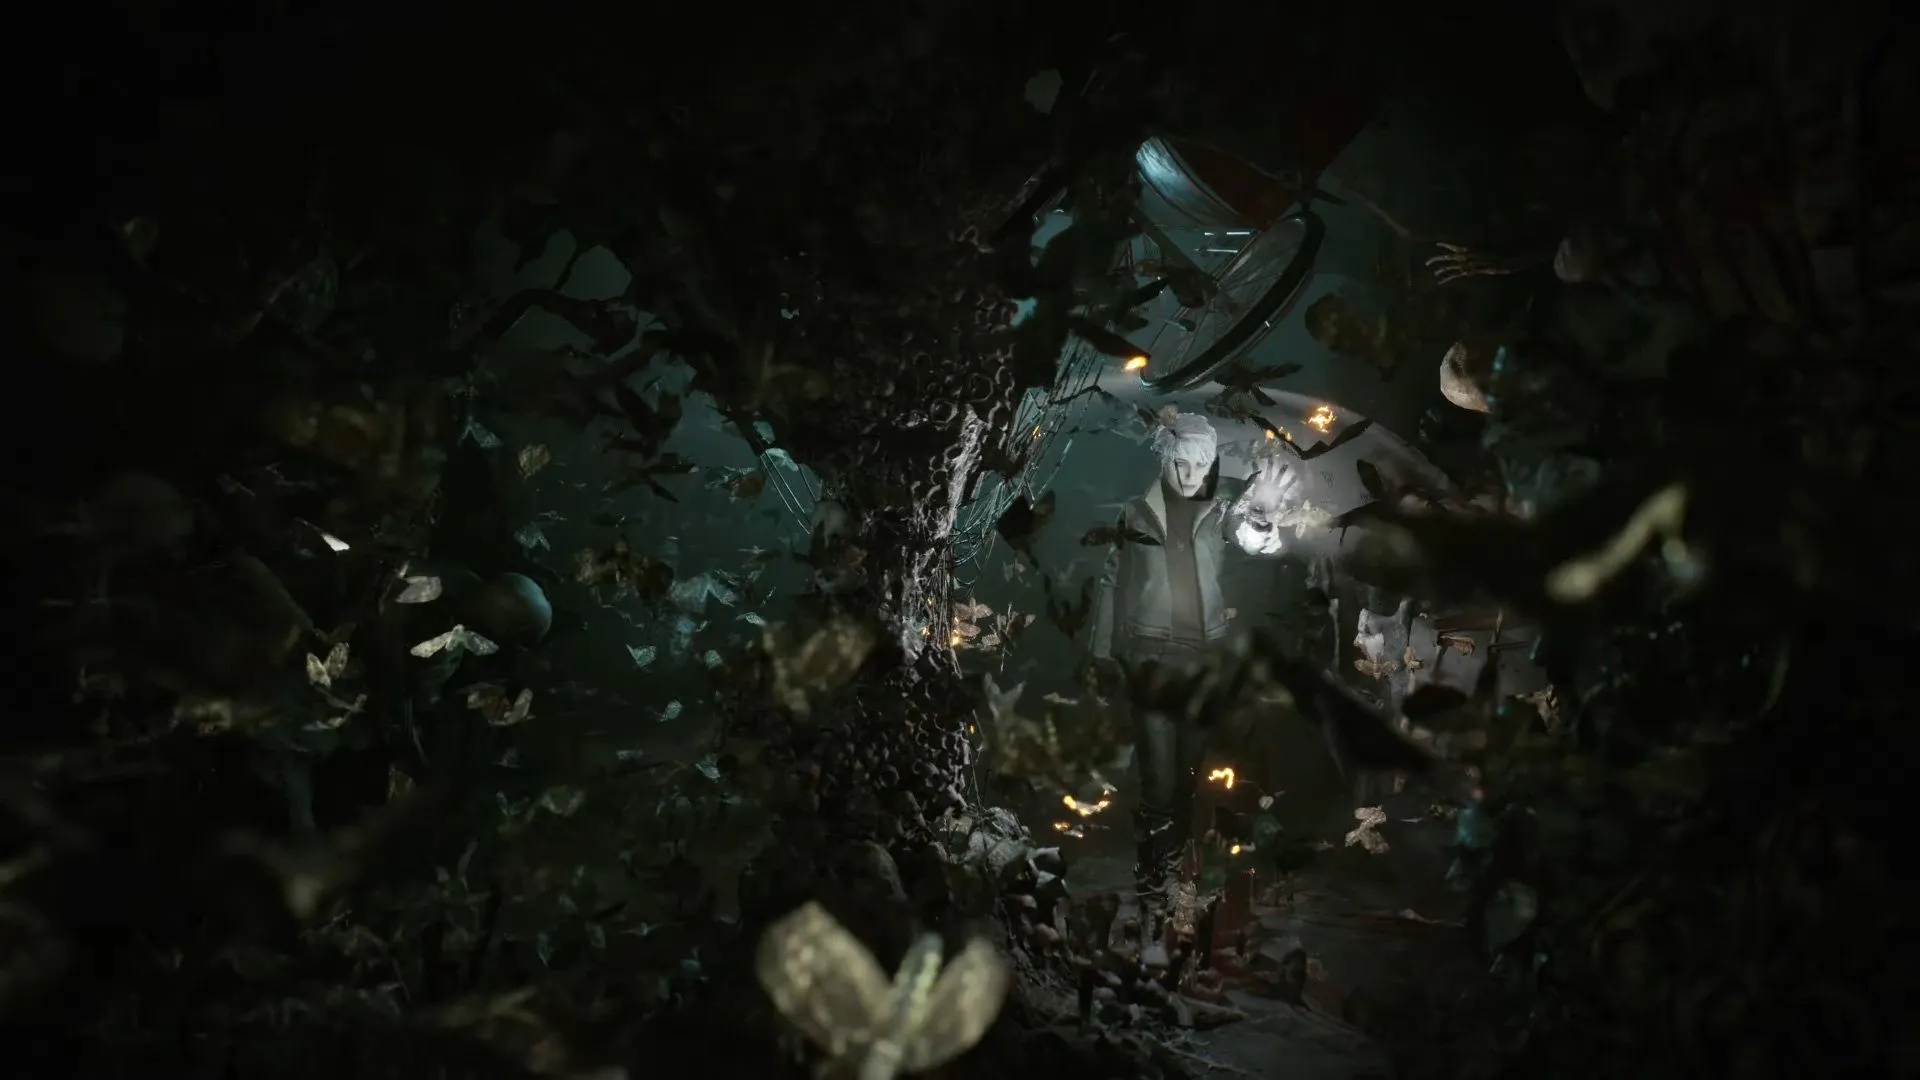 Watch 14 minutes of terrifying gameplay from 'The Medium